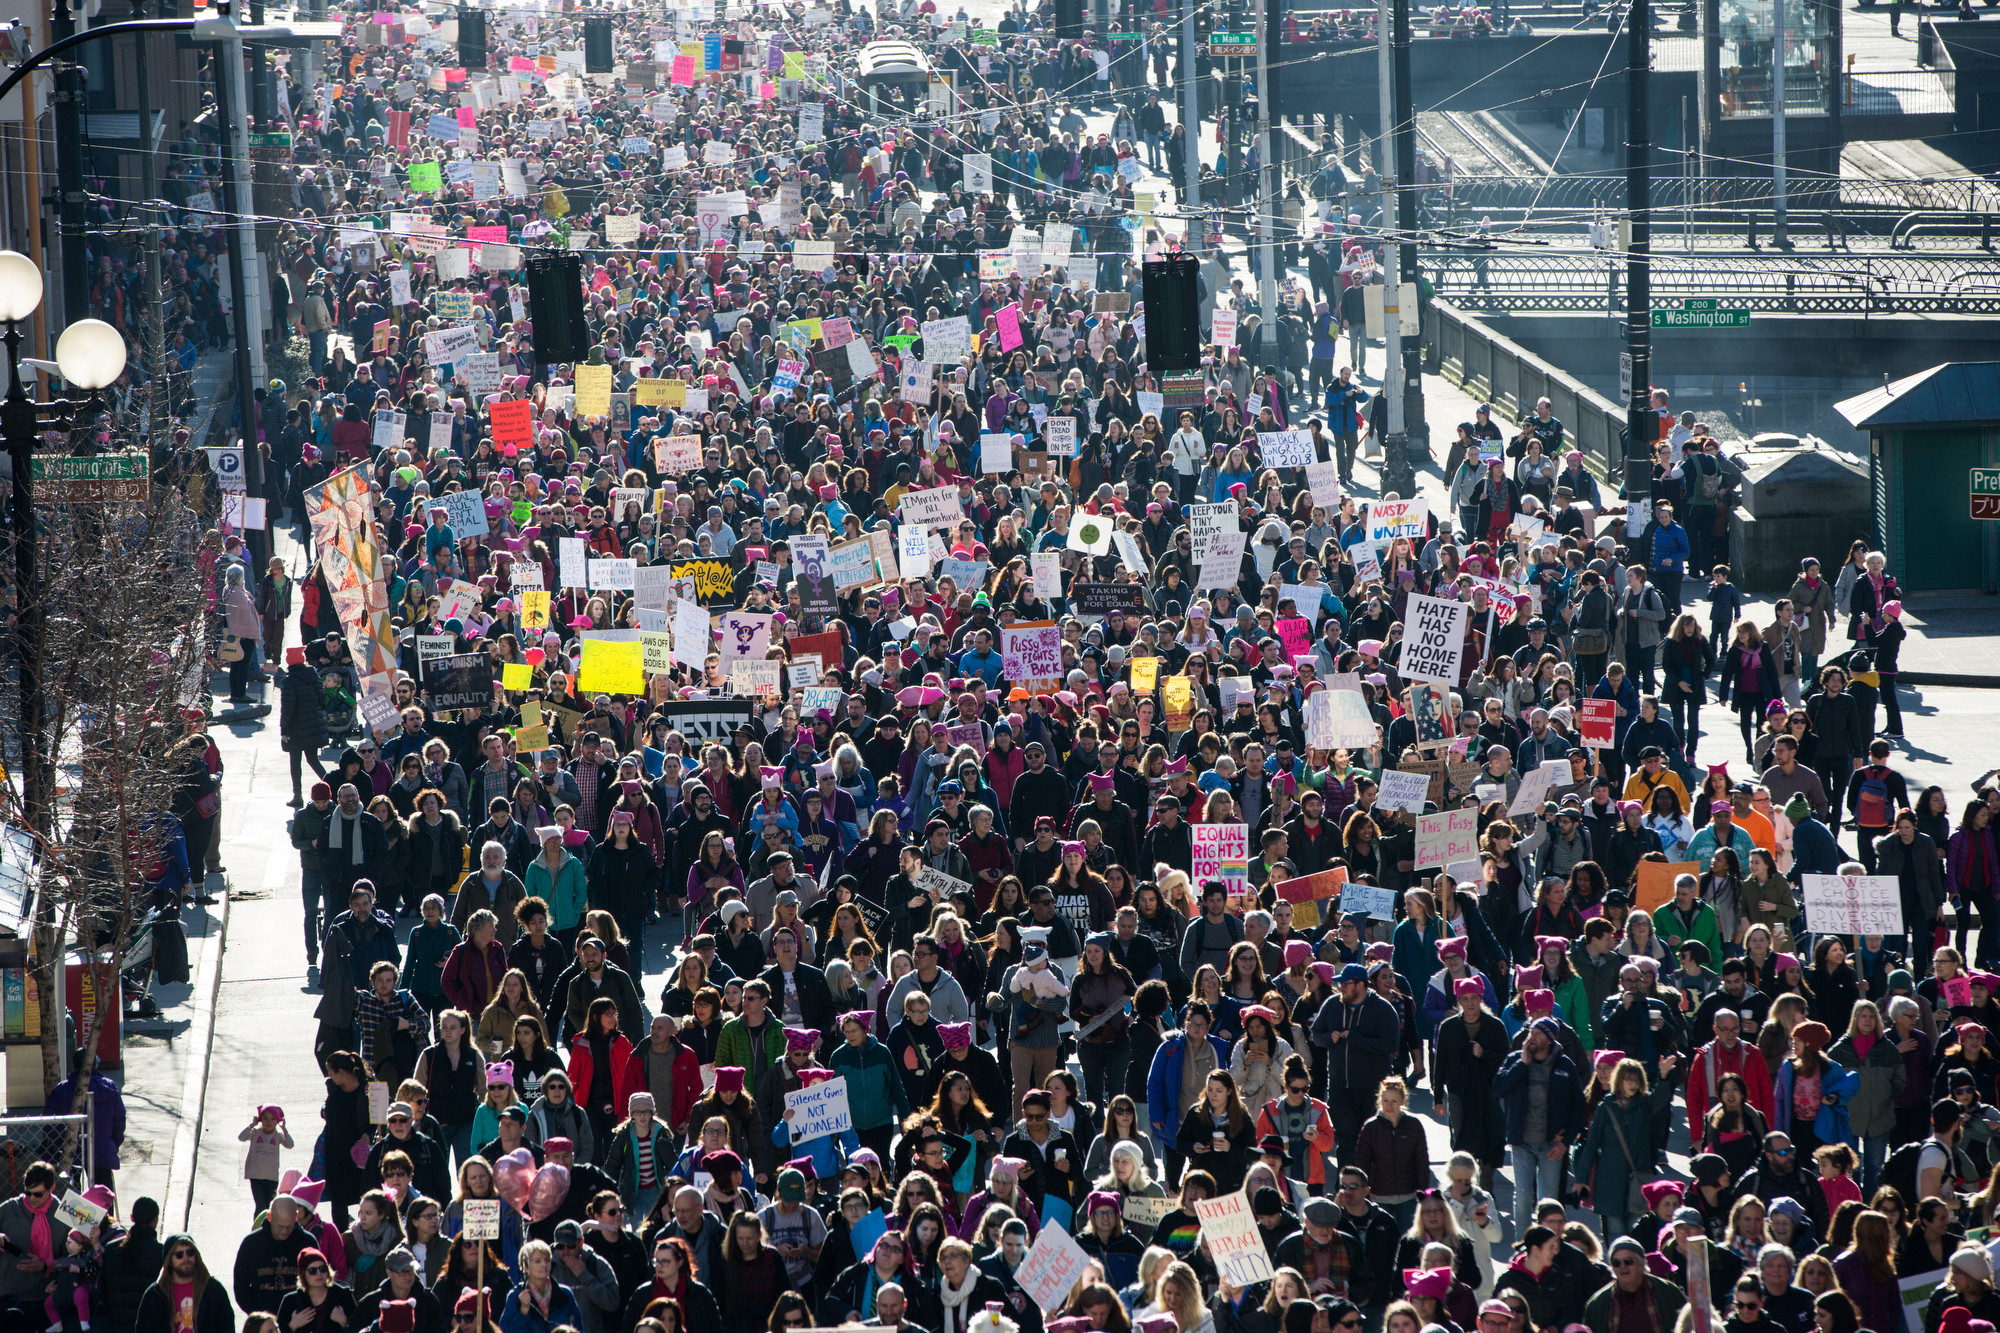 More than 100,000 join Women's March on Seattle